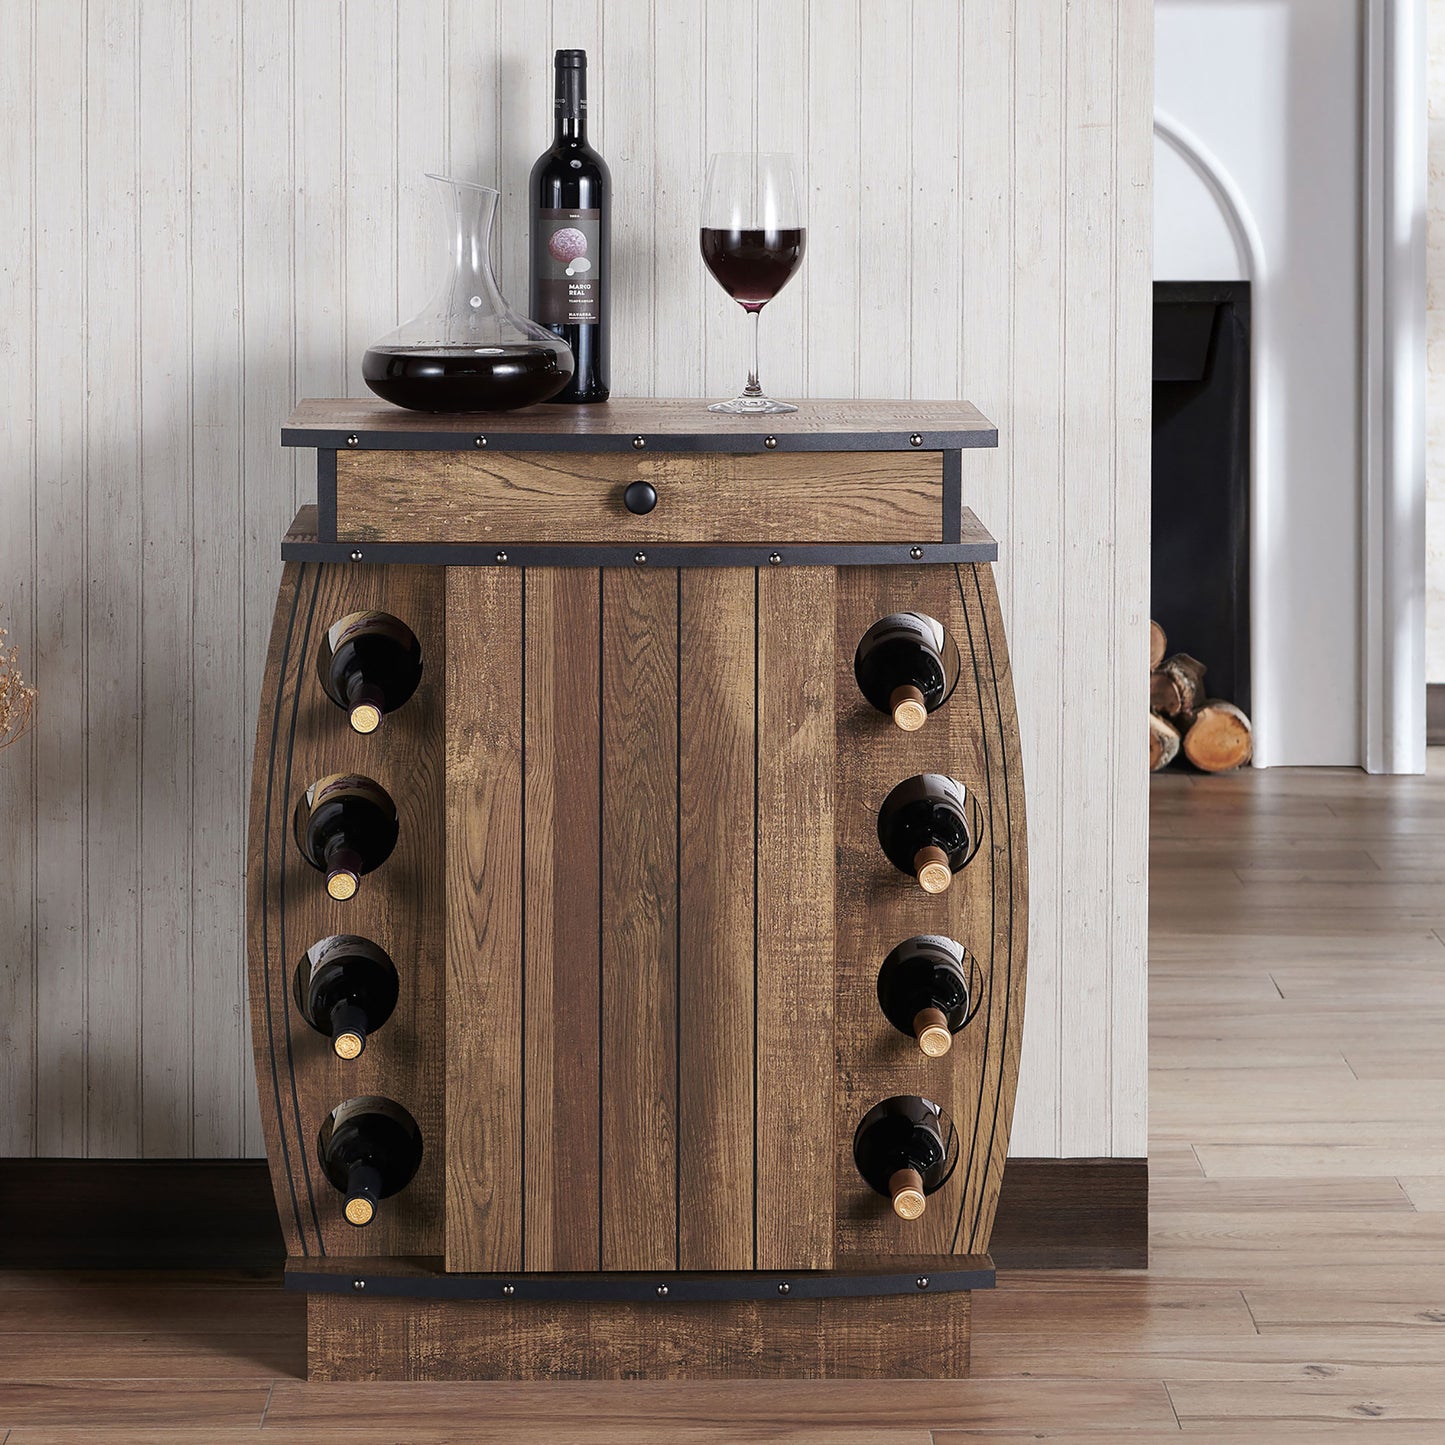 Front-facing rustic reclaimed oak bar cabinet with an eight-bottle wine rack in a living area with bottles and accessories